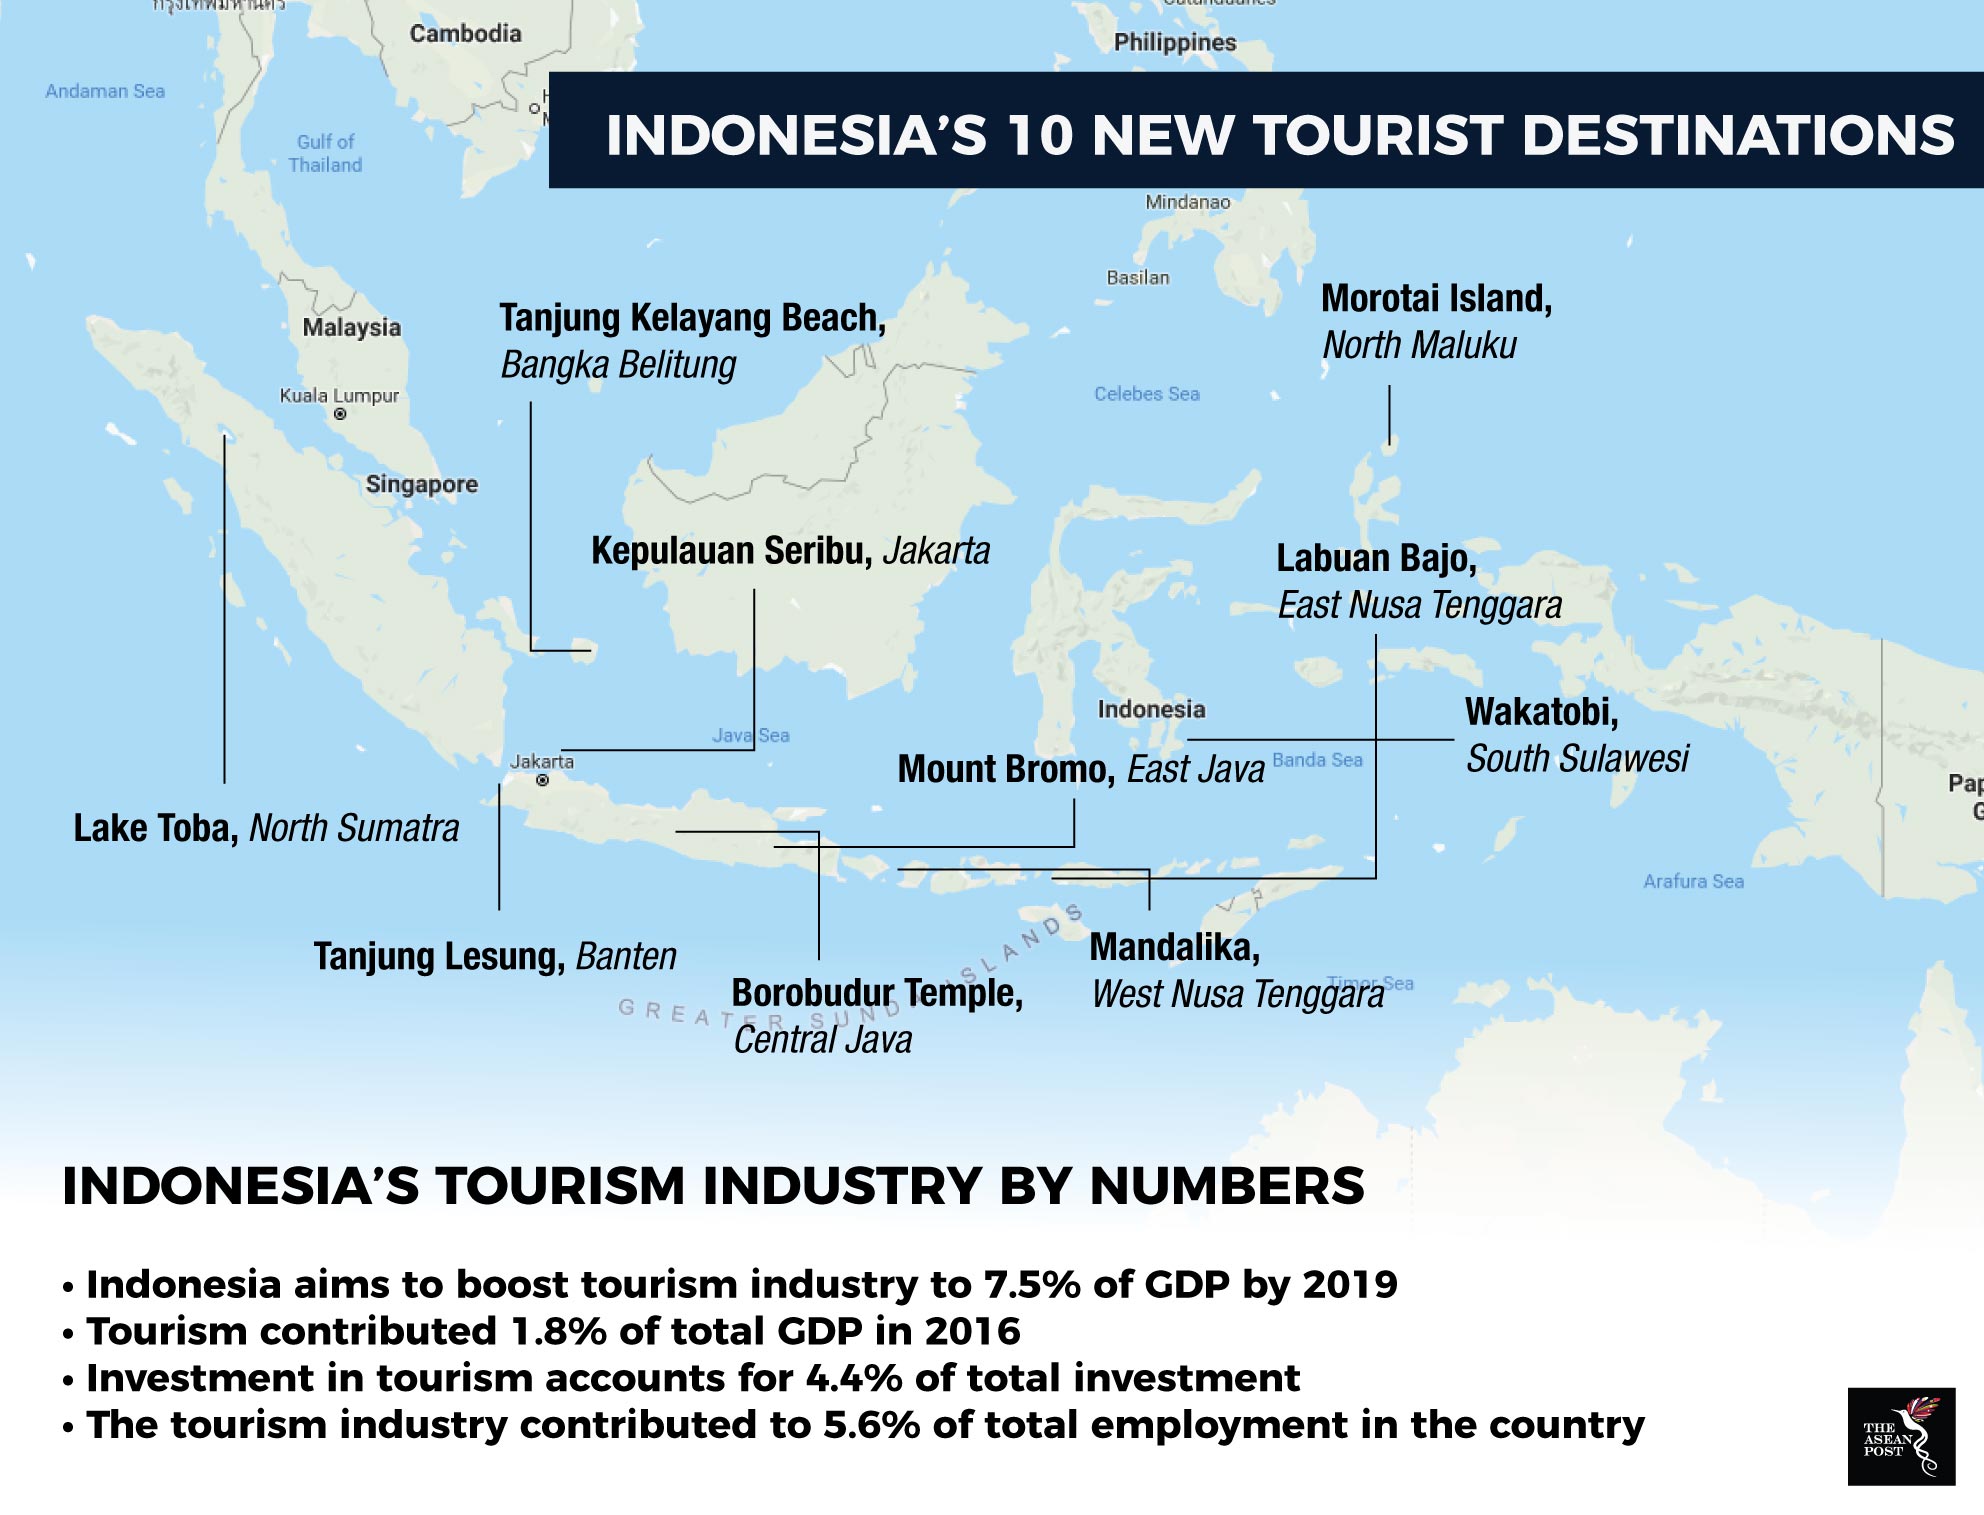 the tourism industry in indonesia expand